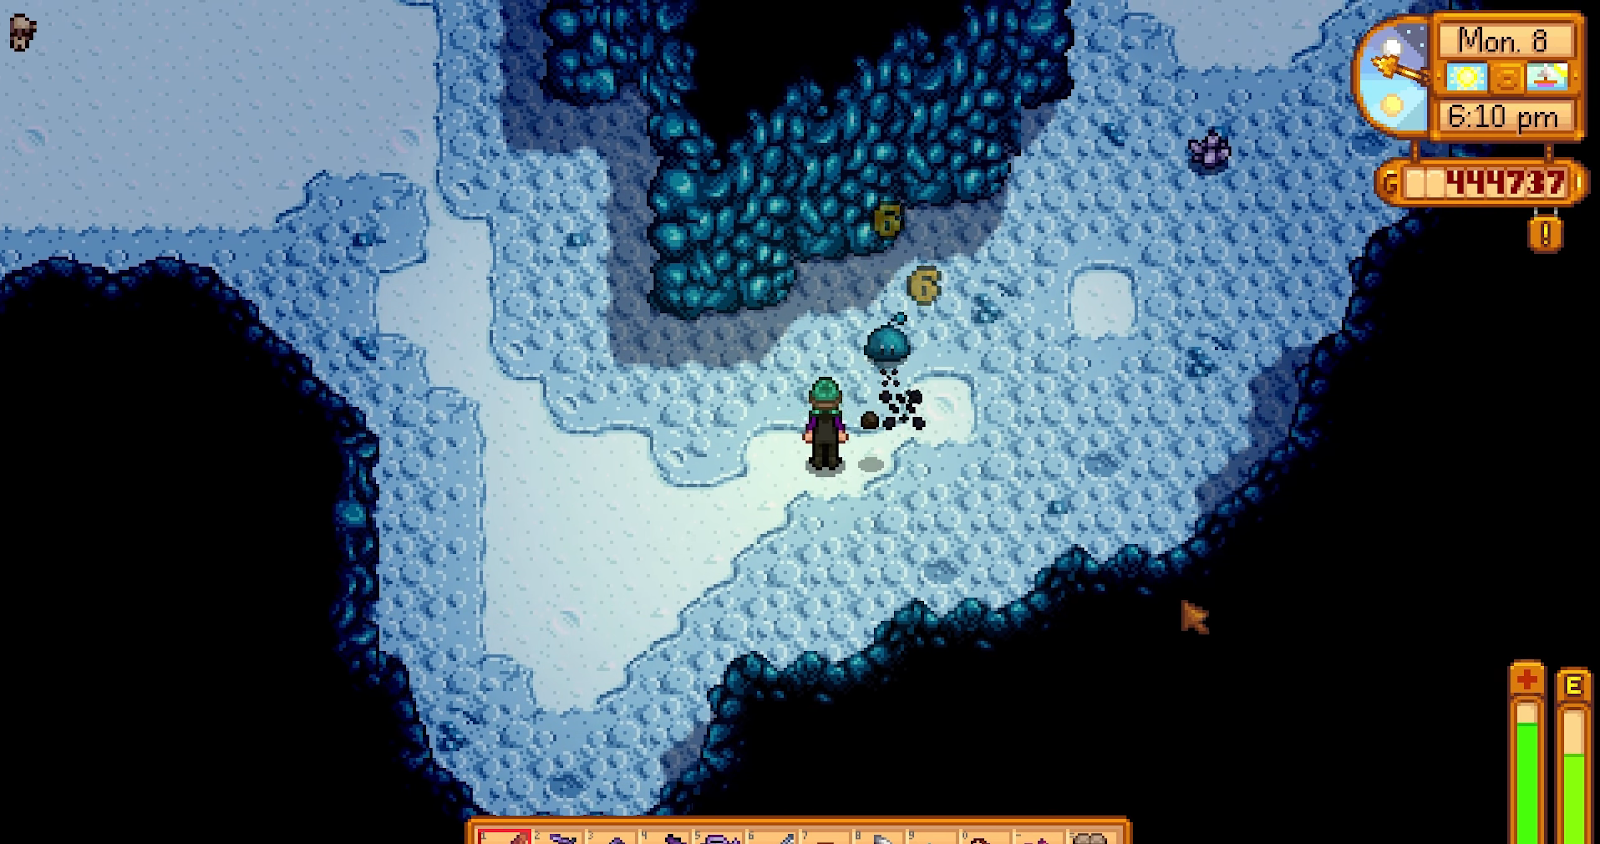 You can get coal in Stardew Valley from monsters.